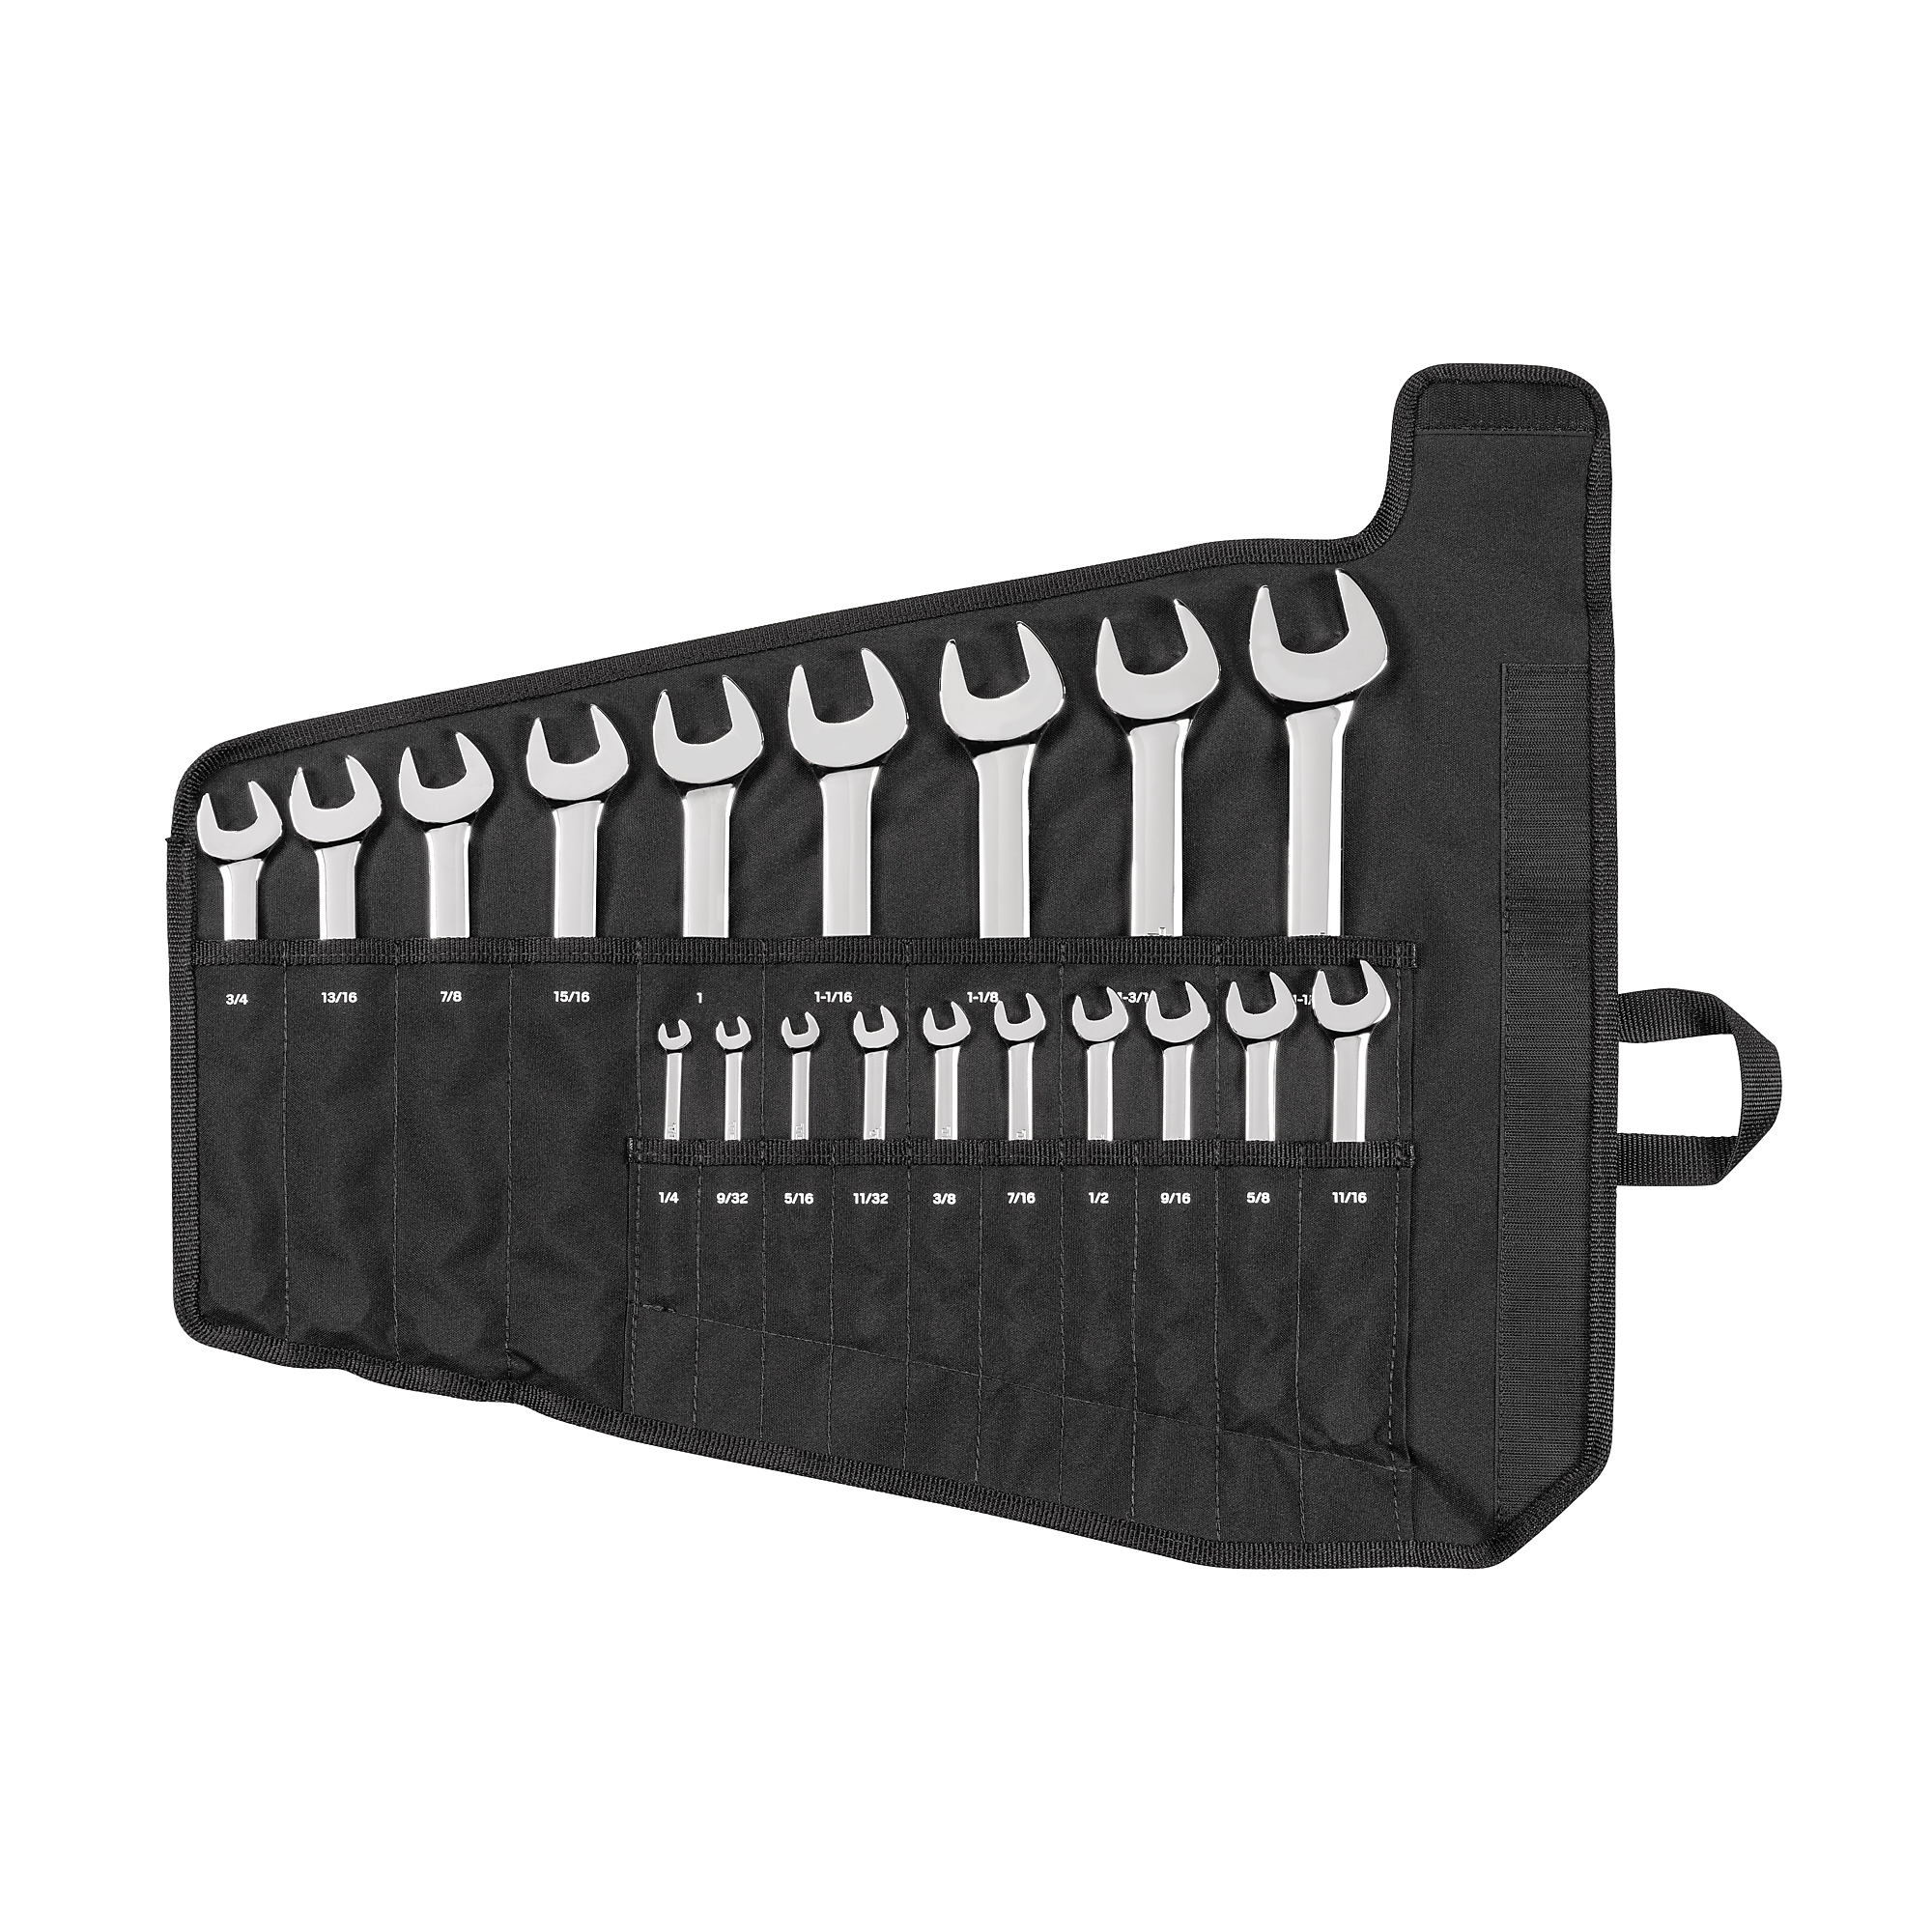 Tekton, 1/4 - 1-1/4Inch 19-Piece Comb. Wrench Set w/ Pouch, Pieces (qty.) 19 Measurement Standard Standard (SAE), Model WCB94103